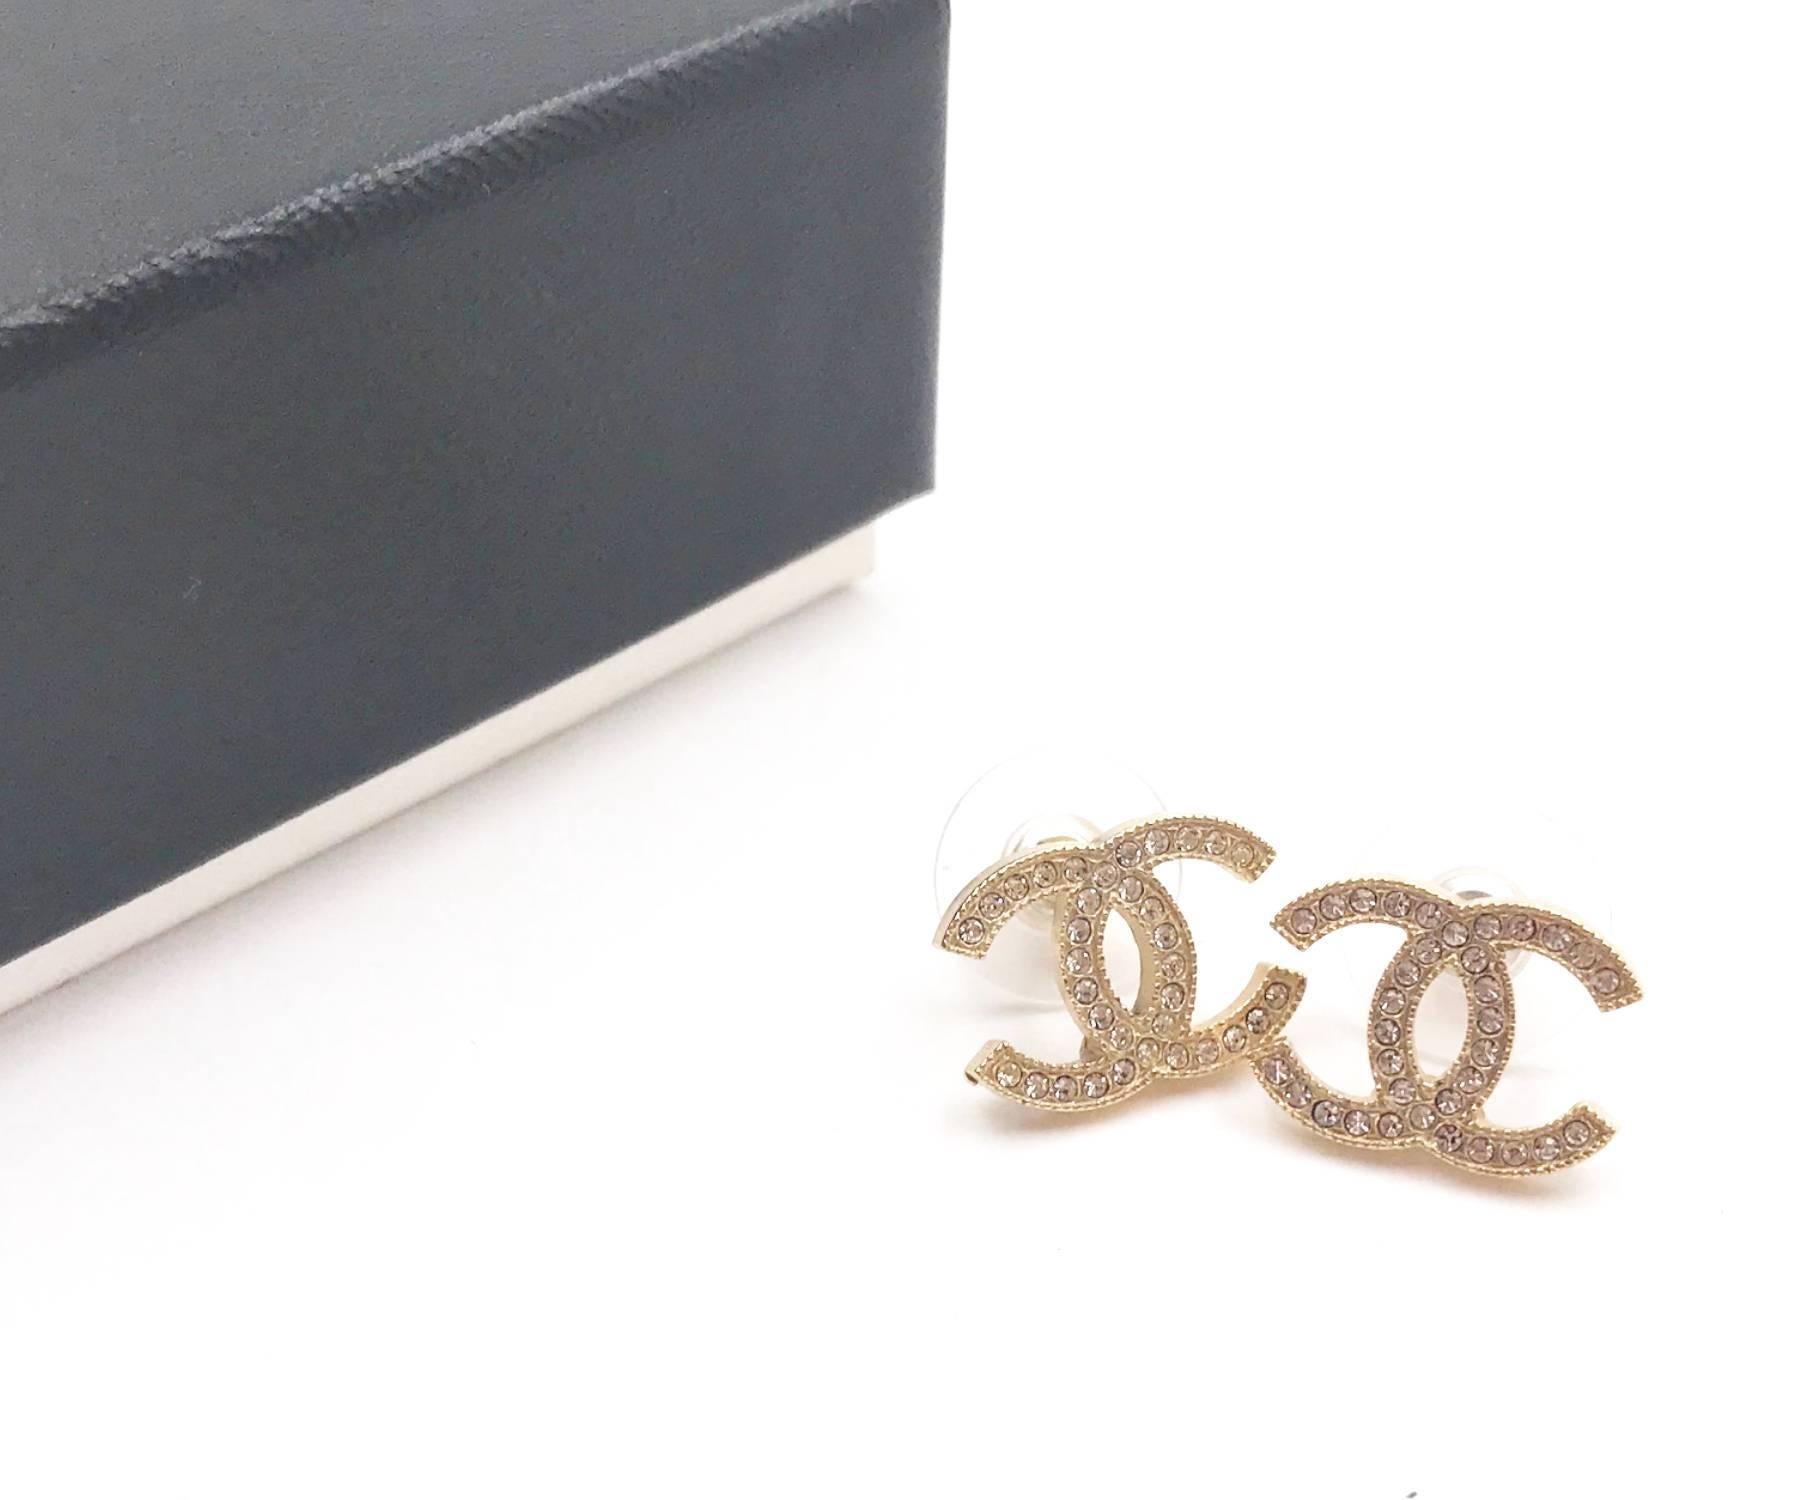 Chanel Classic Gold CC Crystal Moscova Piercing Earrings

*Marked 13
*Made in France
*Comes with the original box and dustbag

-It is approximately 0.6